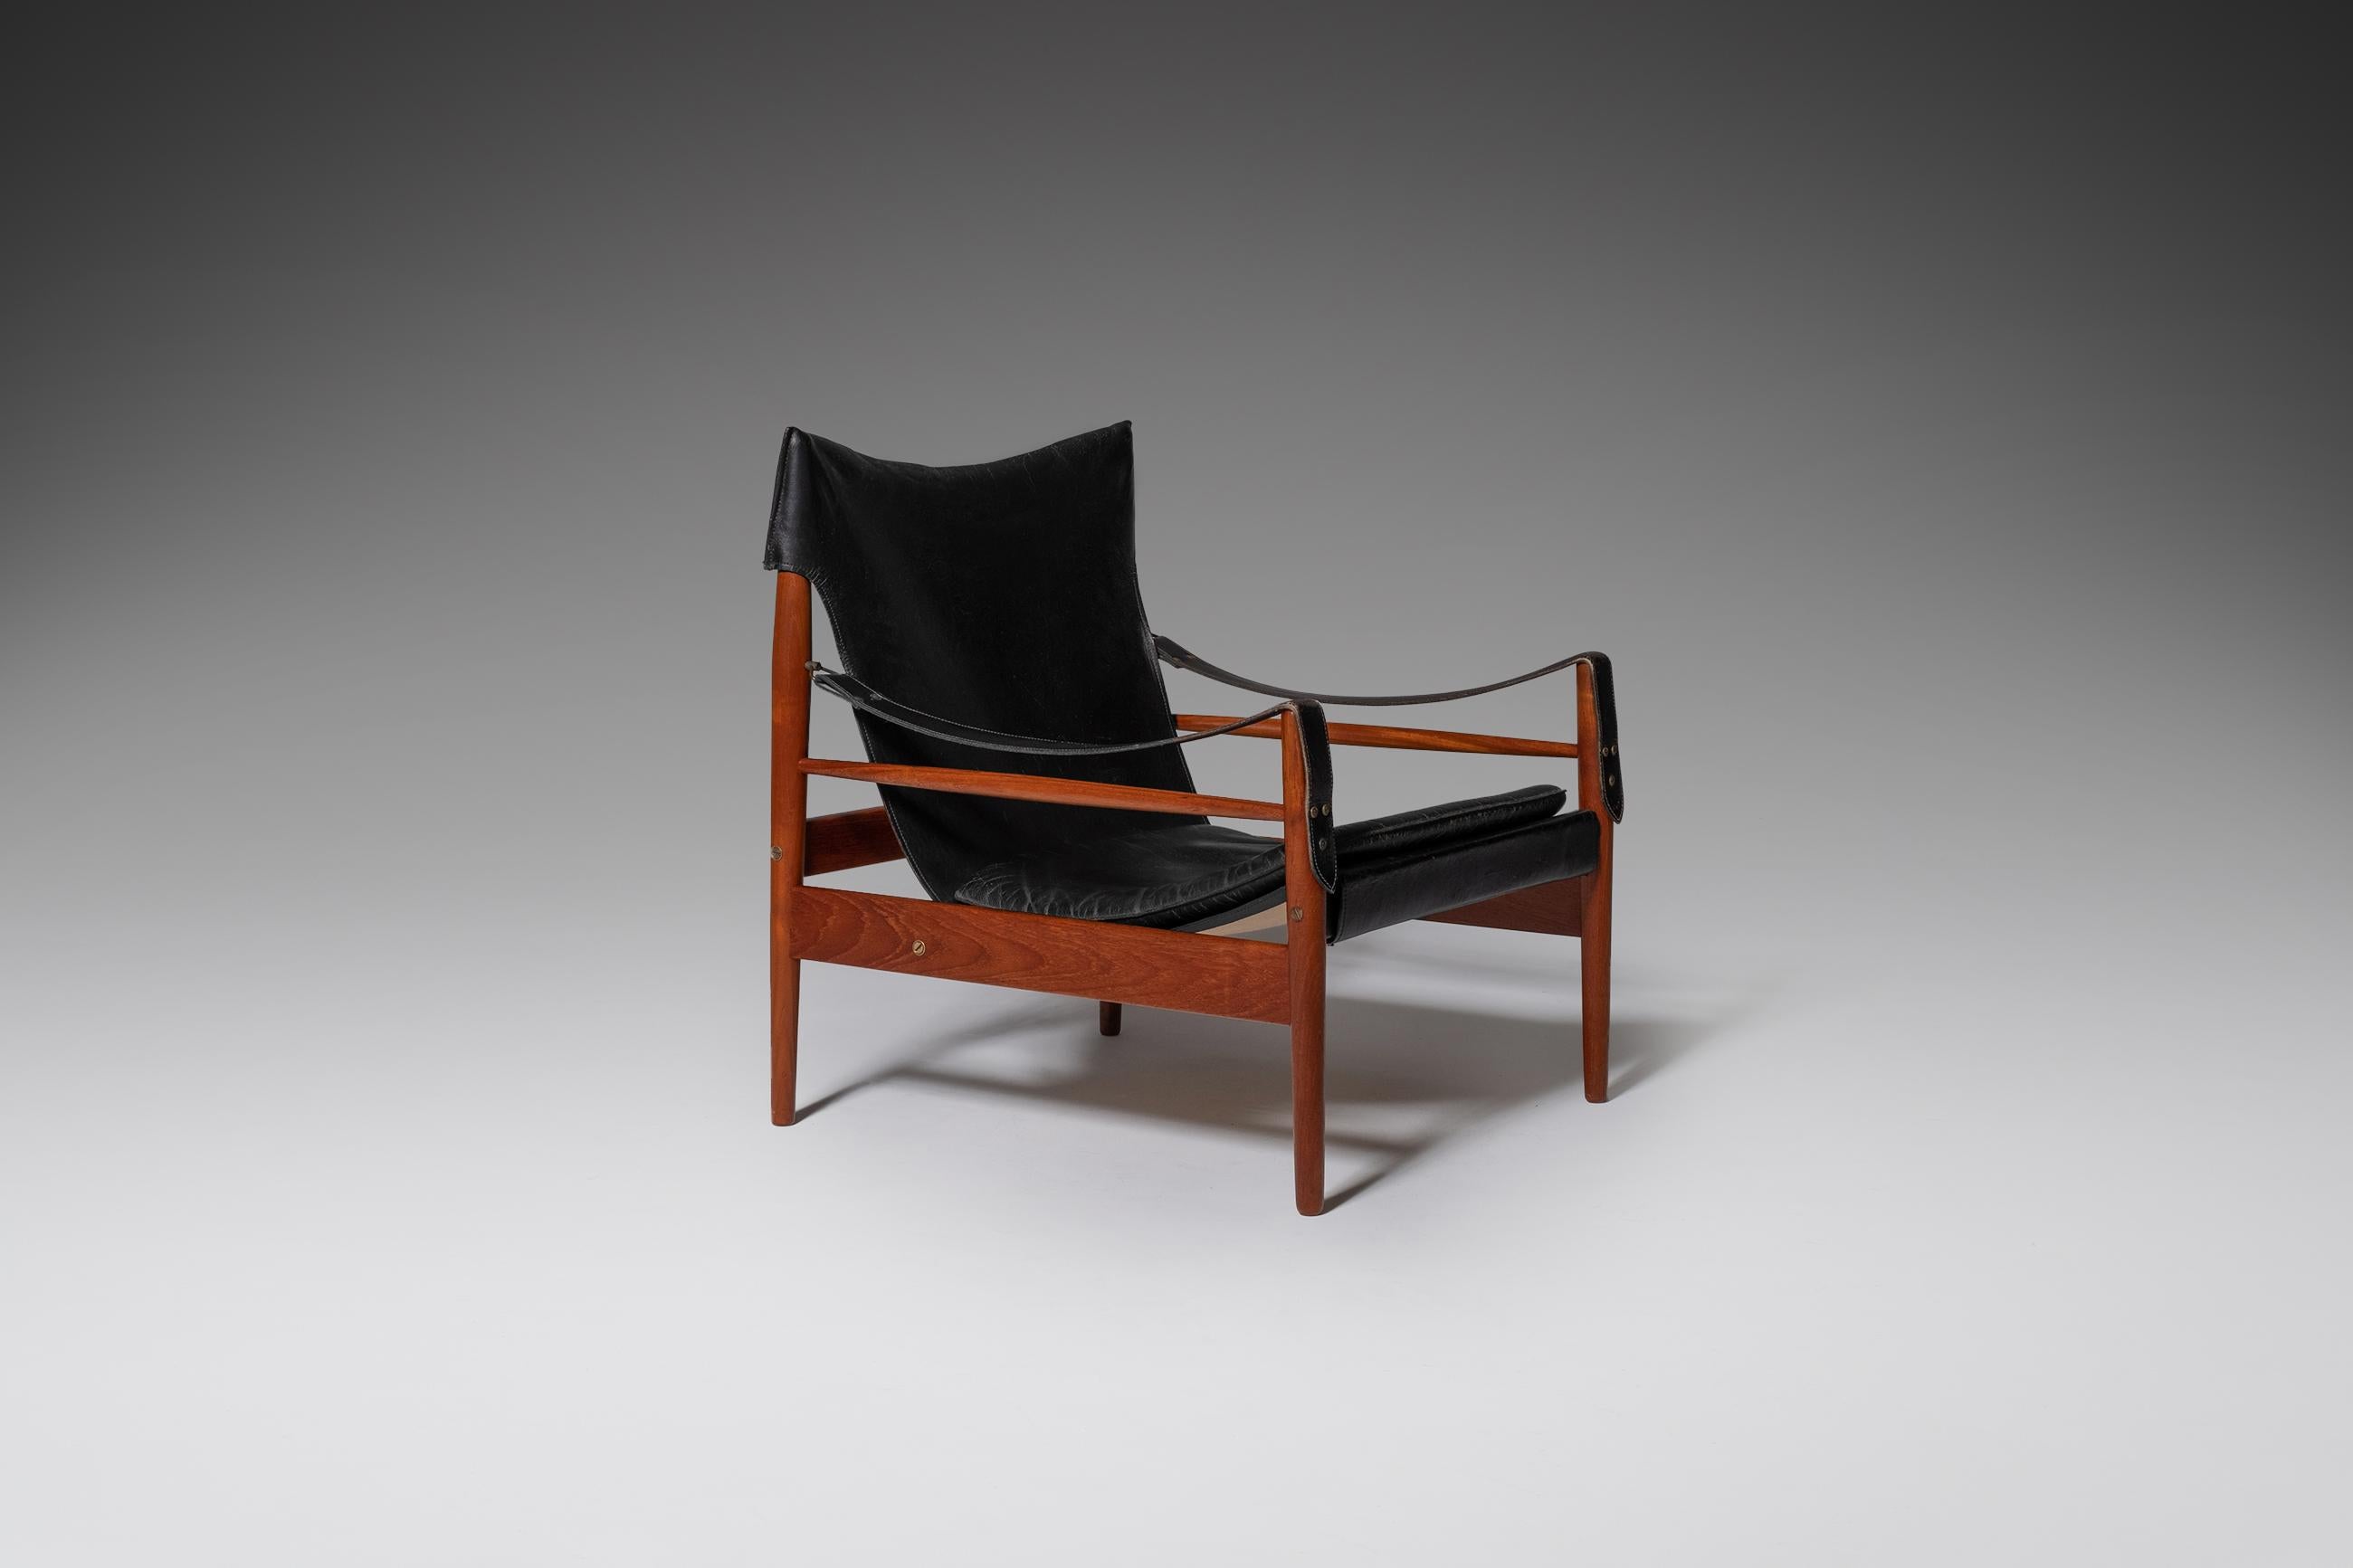 Remarkable “Antilope” Safari or Hunting lounge chair by Hanson Olsen, produced by Viskadalens möbler, Denmark 1960s. The chair consist out of an elegant and solid teak frame which holds a beautiful patinated leather seat which is nicely folded